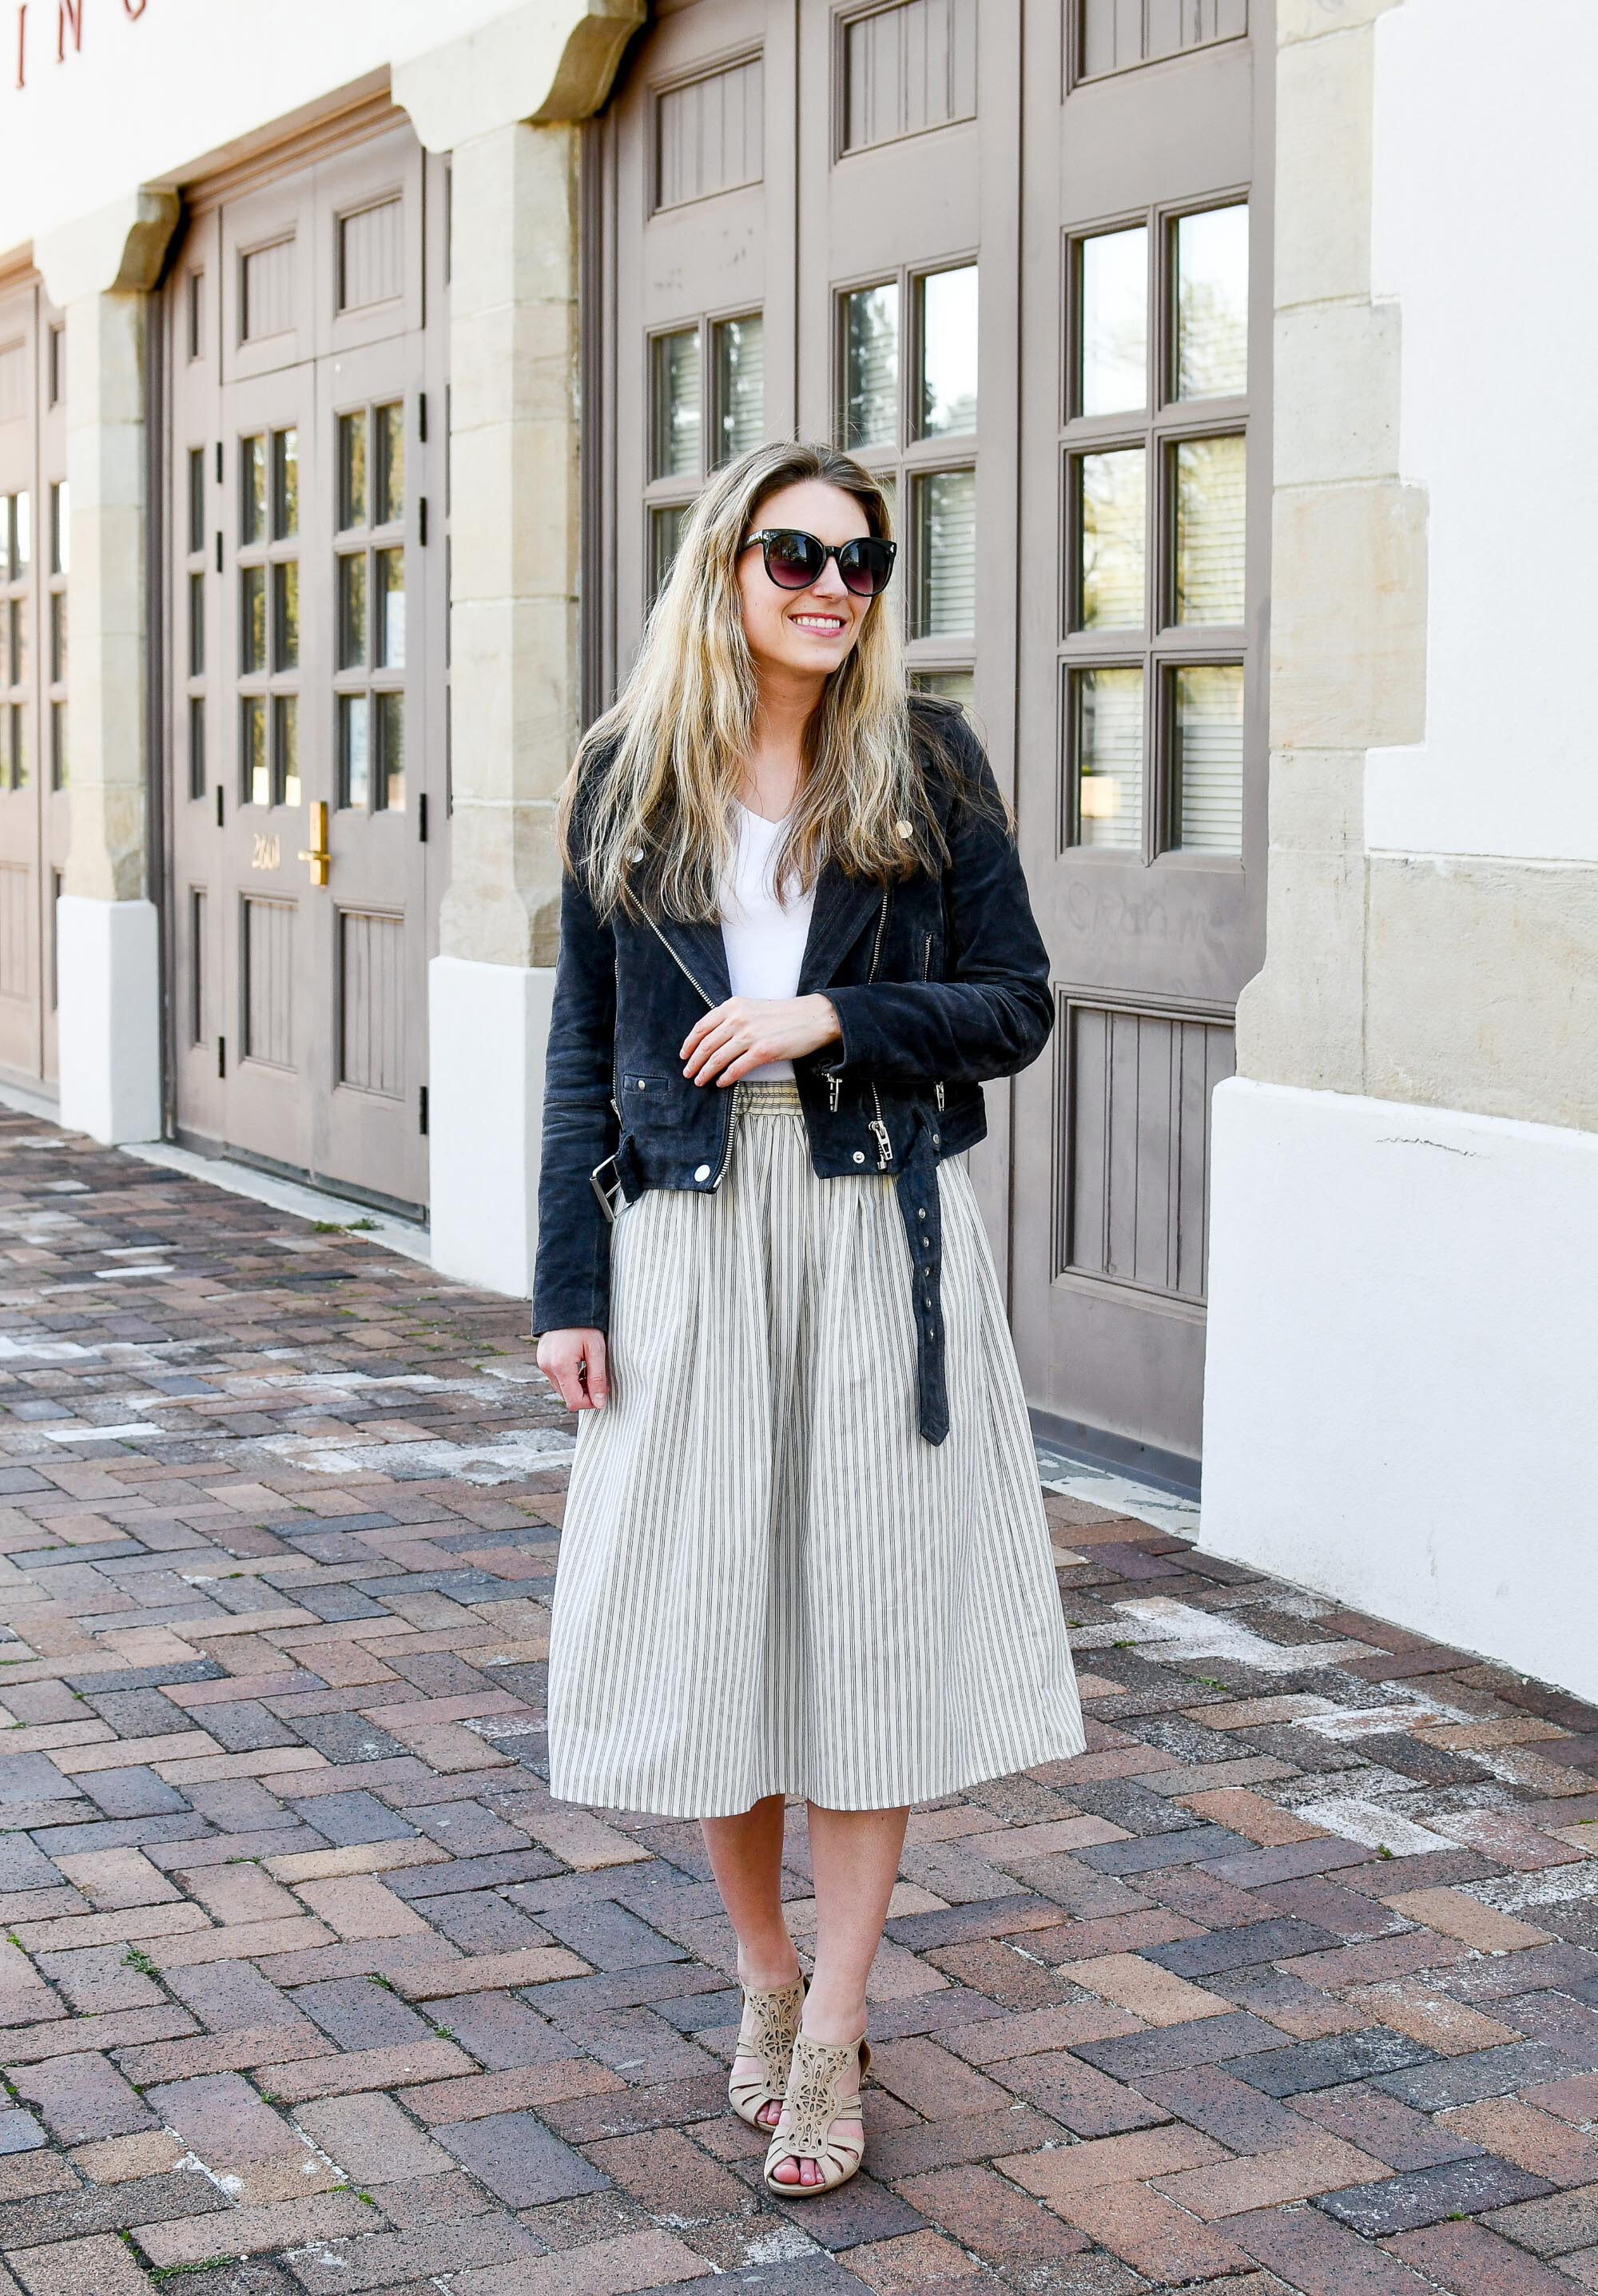 My style: Midi skirts (Greta striped skirt by Amour Vert) — Cotton Cashmere Cat Hair